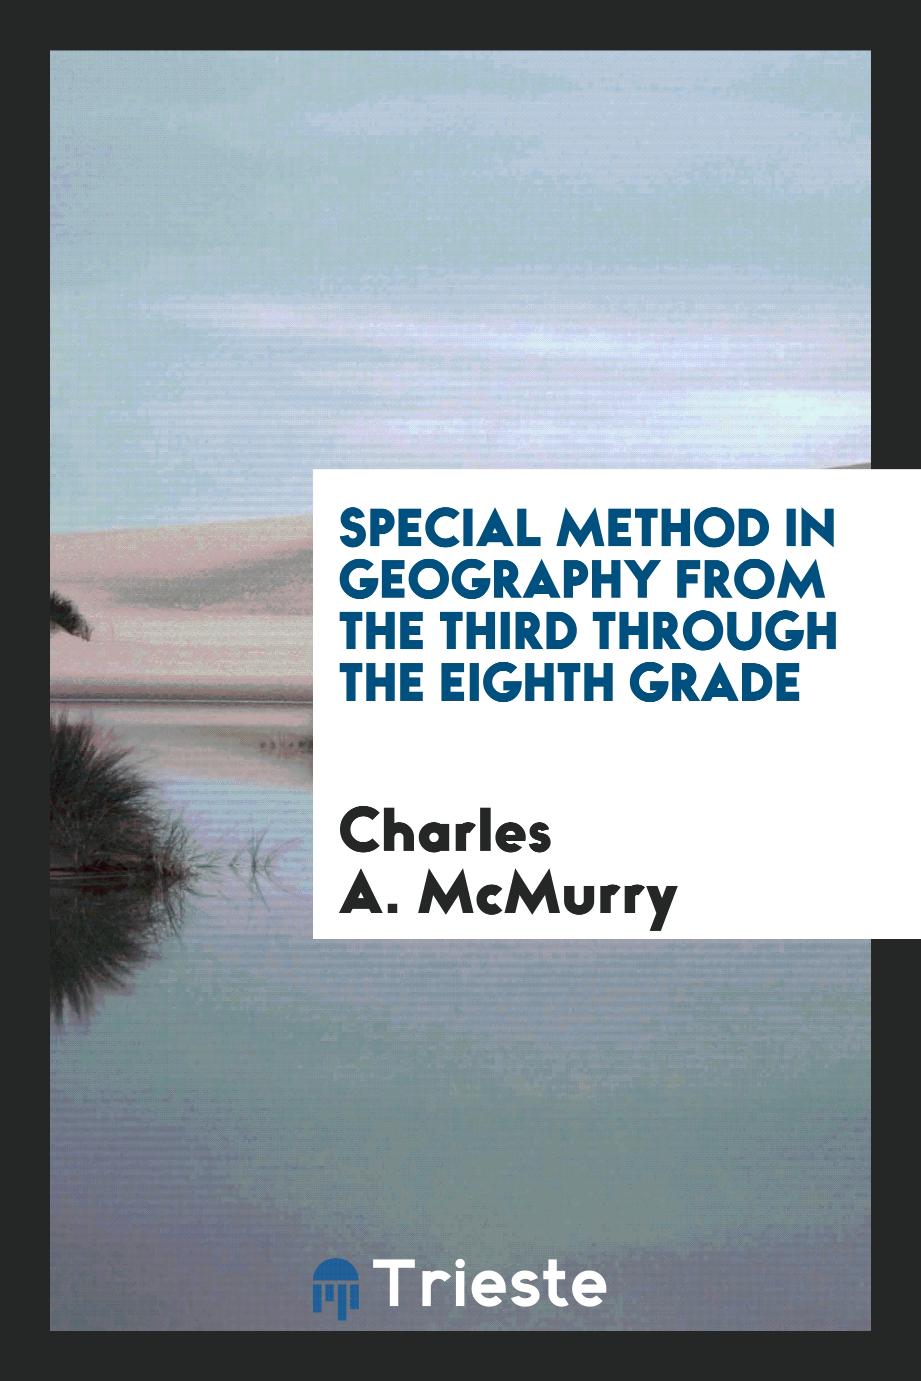 Special Method in Geography from the Third Through the Eighth Grade